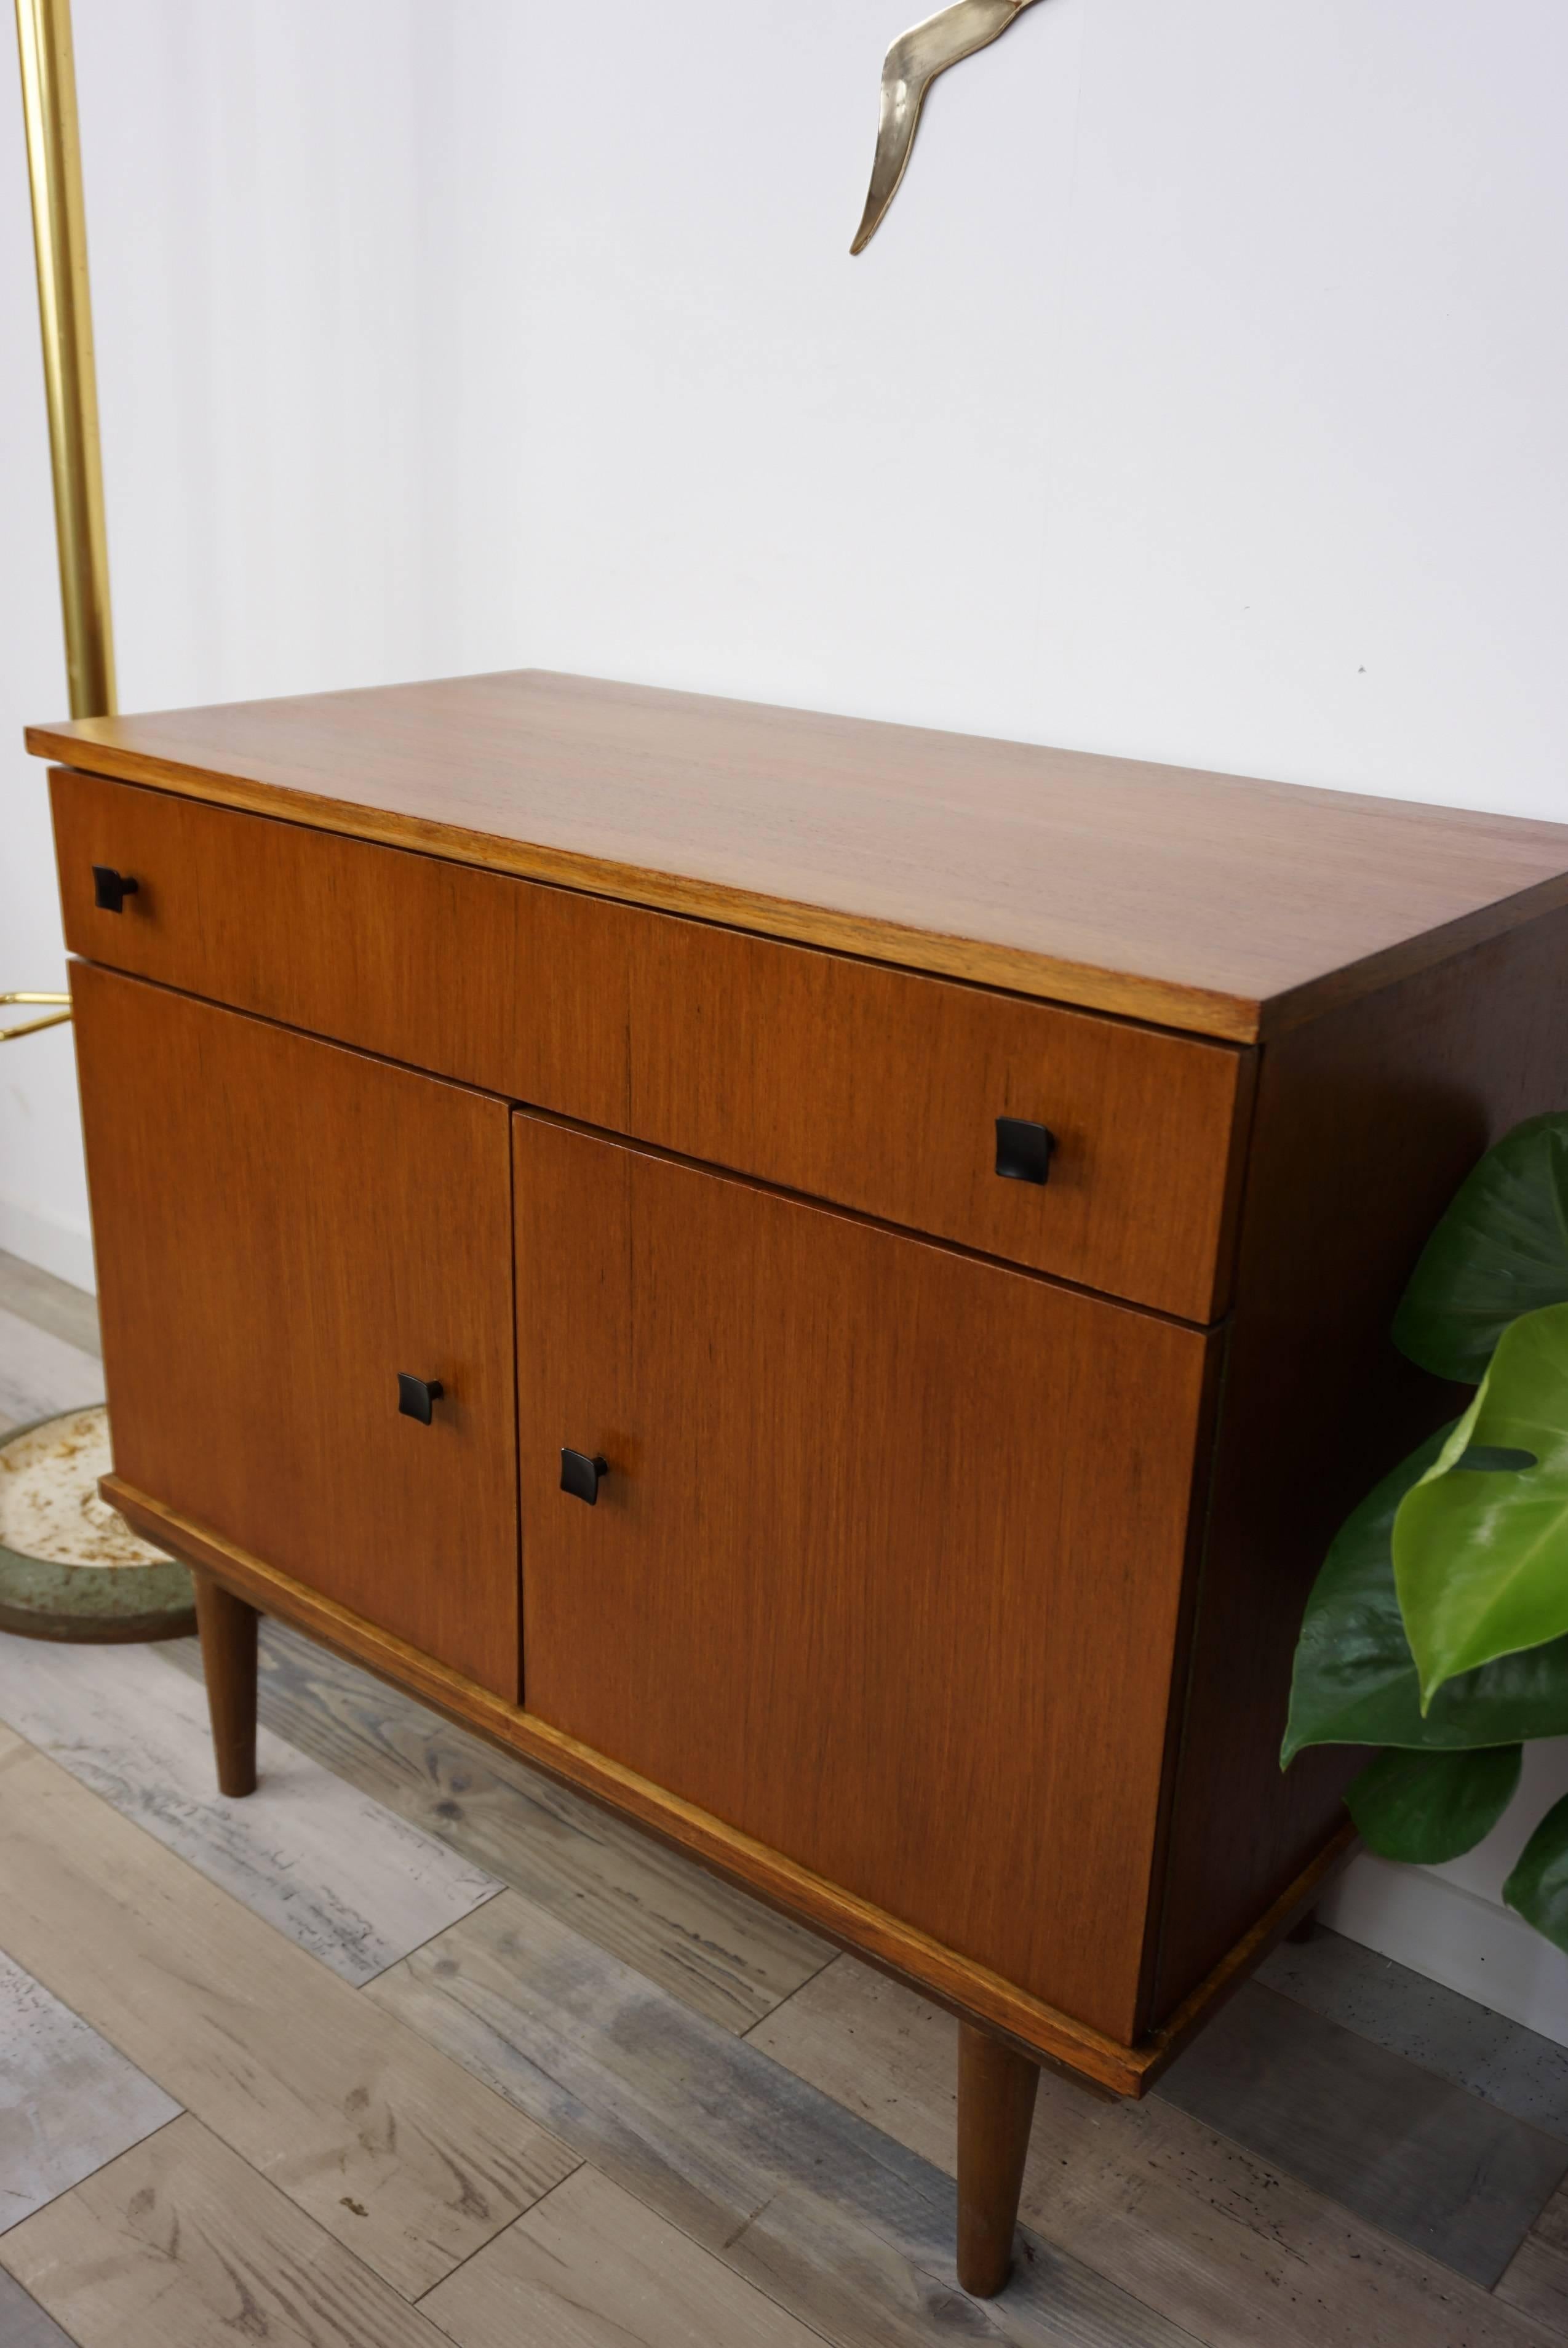 20th Century Wooden Teak Storage Unit from the 1950s-1960s